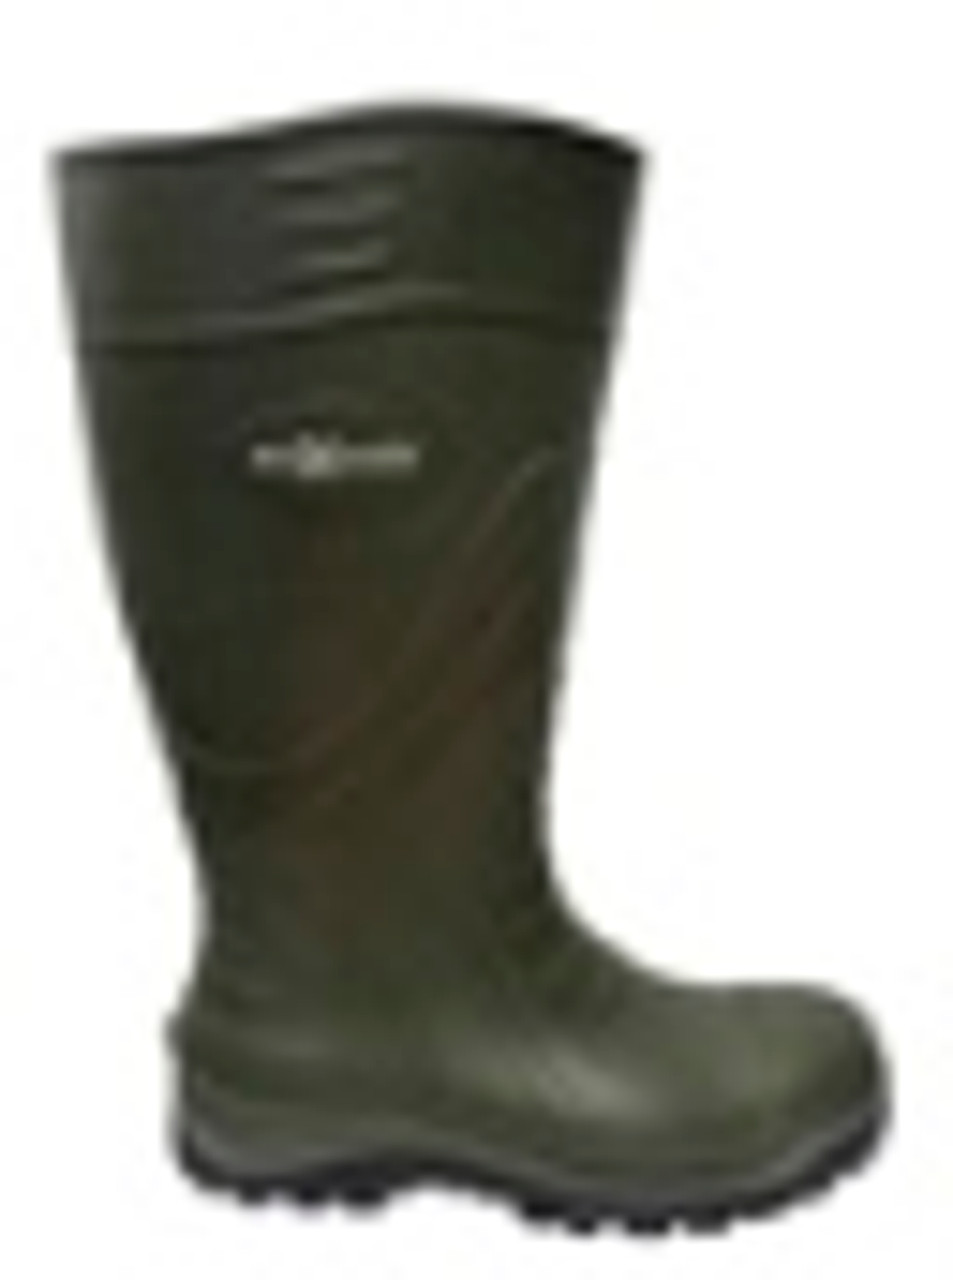 Patrol Green Pu Boot W/ Safety Toe, Size 12